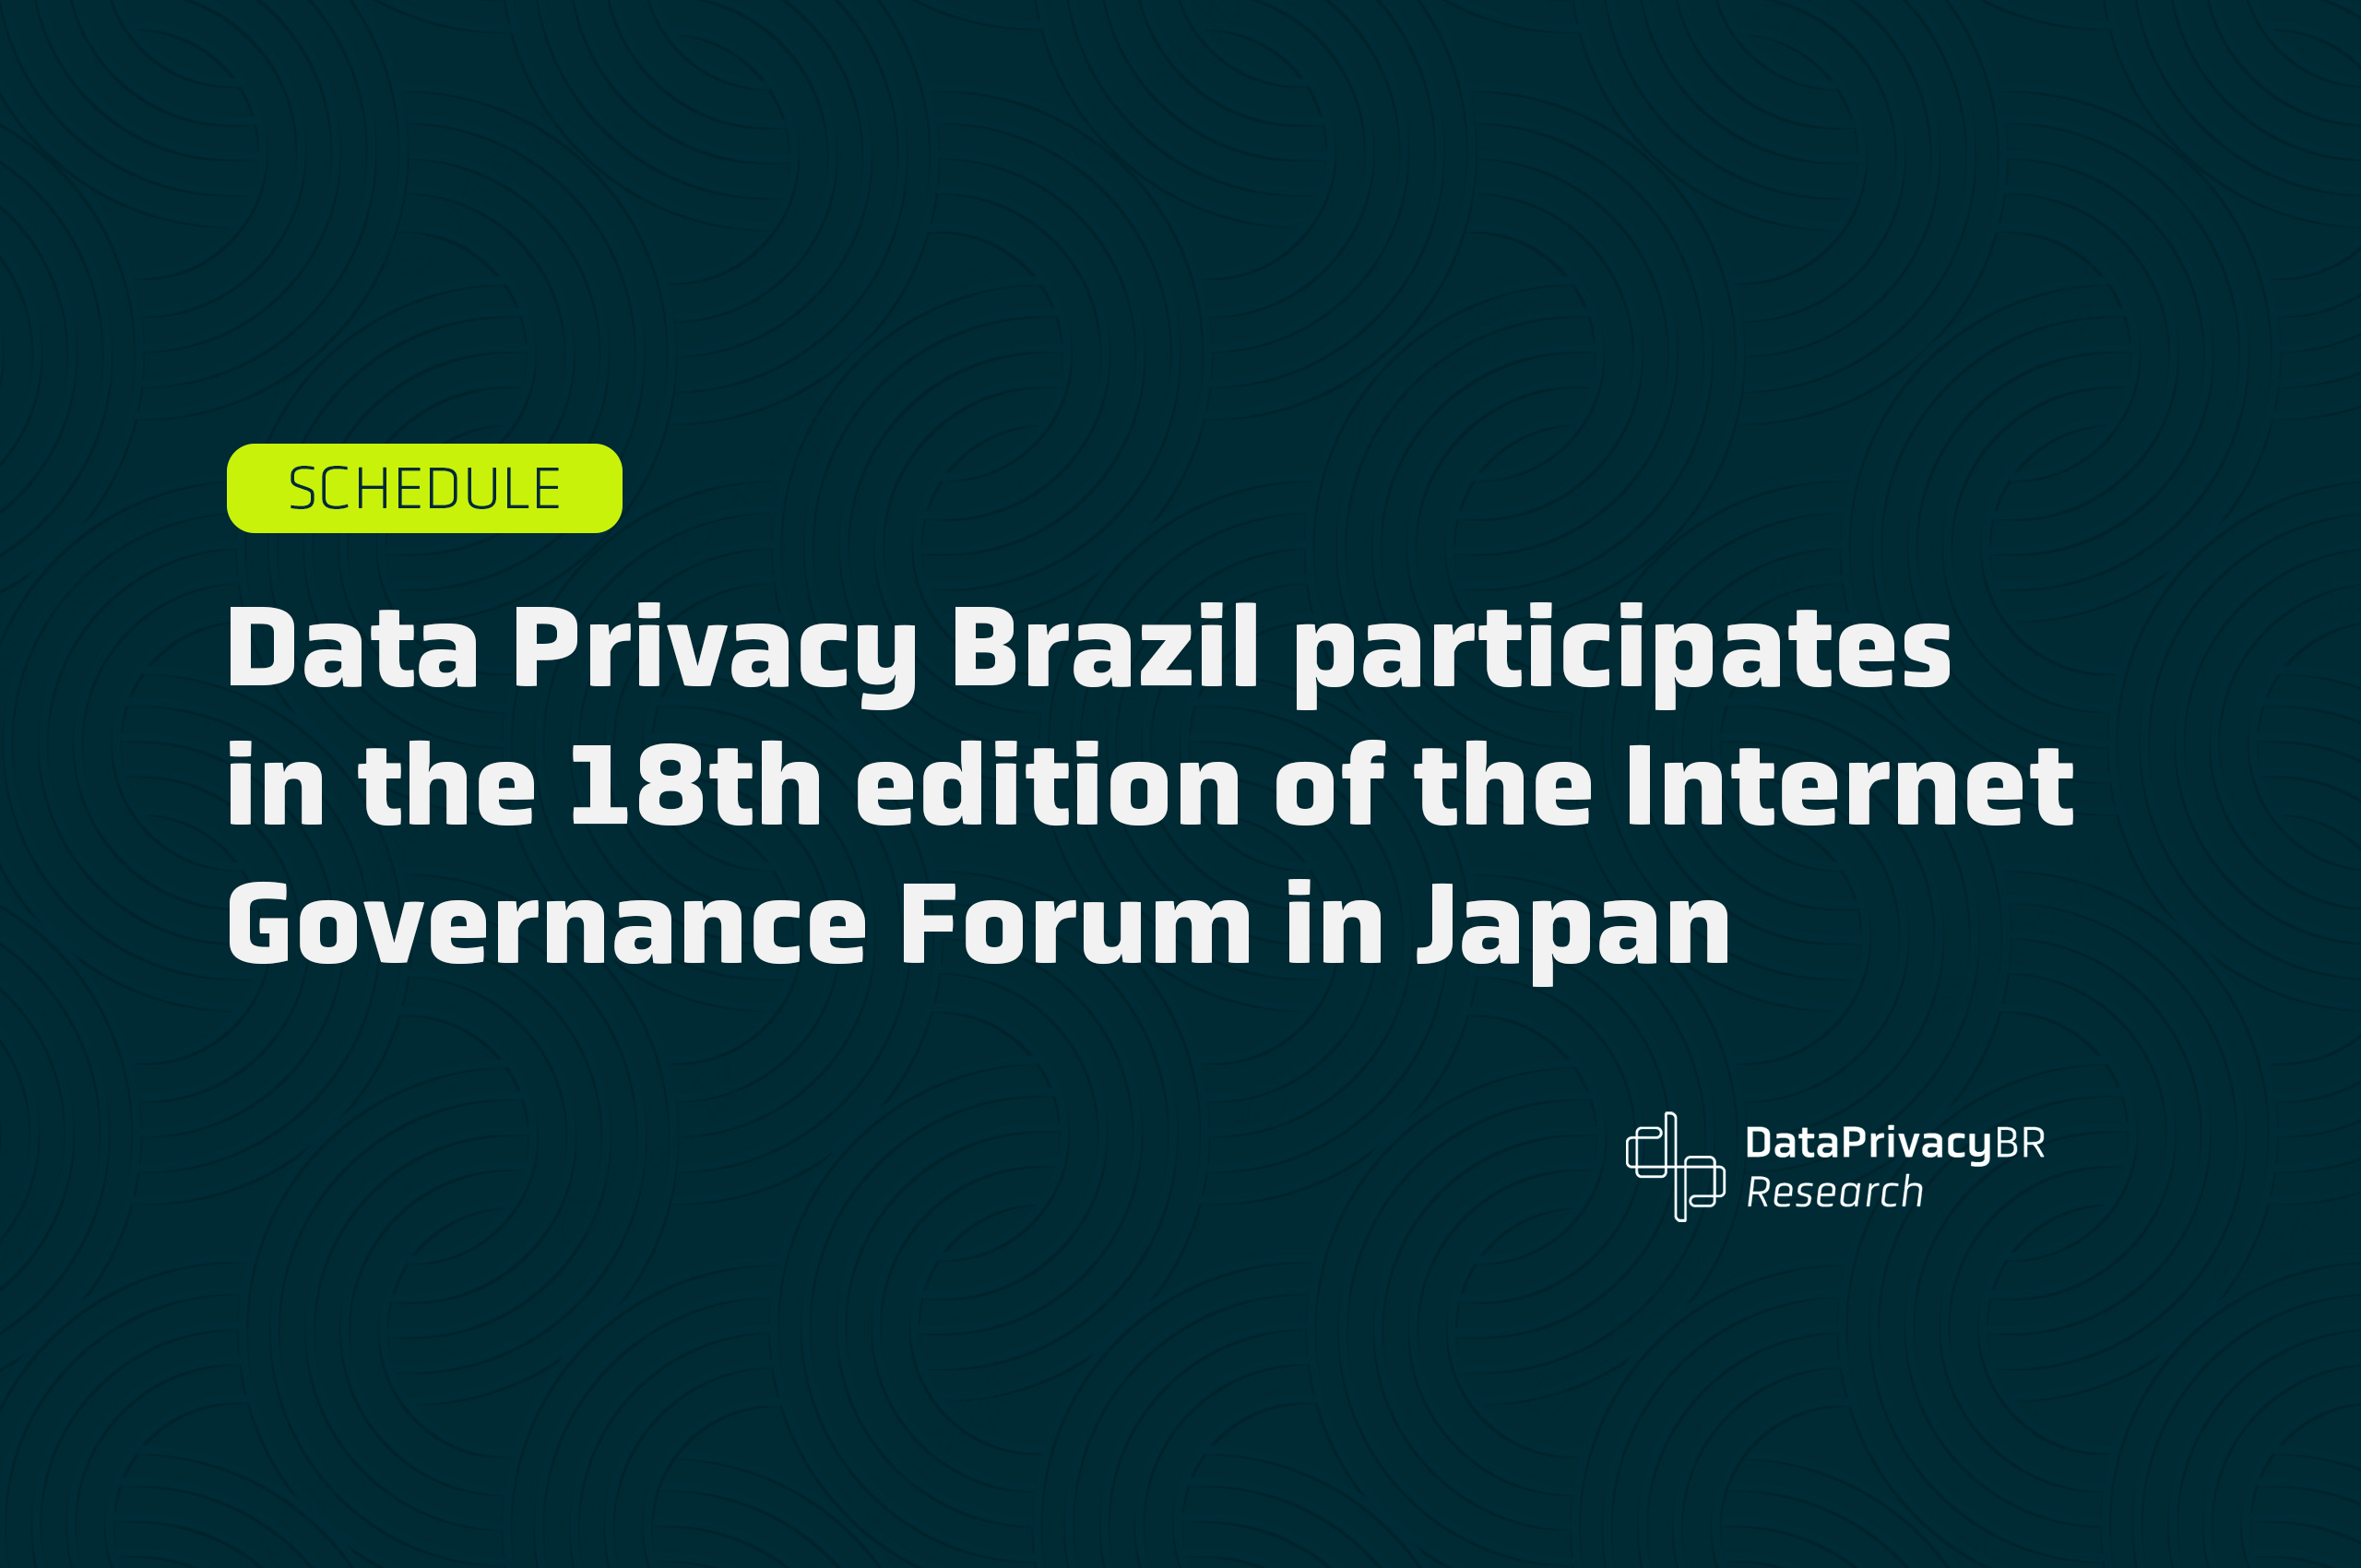 Data Privacy Brazil participates in the 18th edition of the Internet Governance Forum in Japan